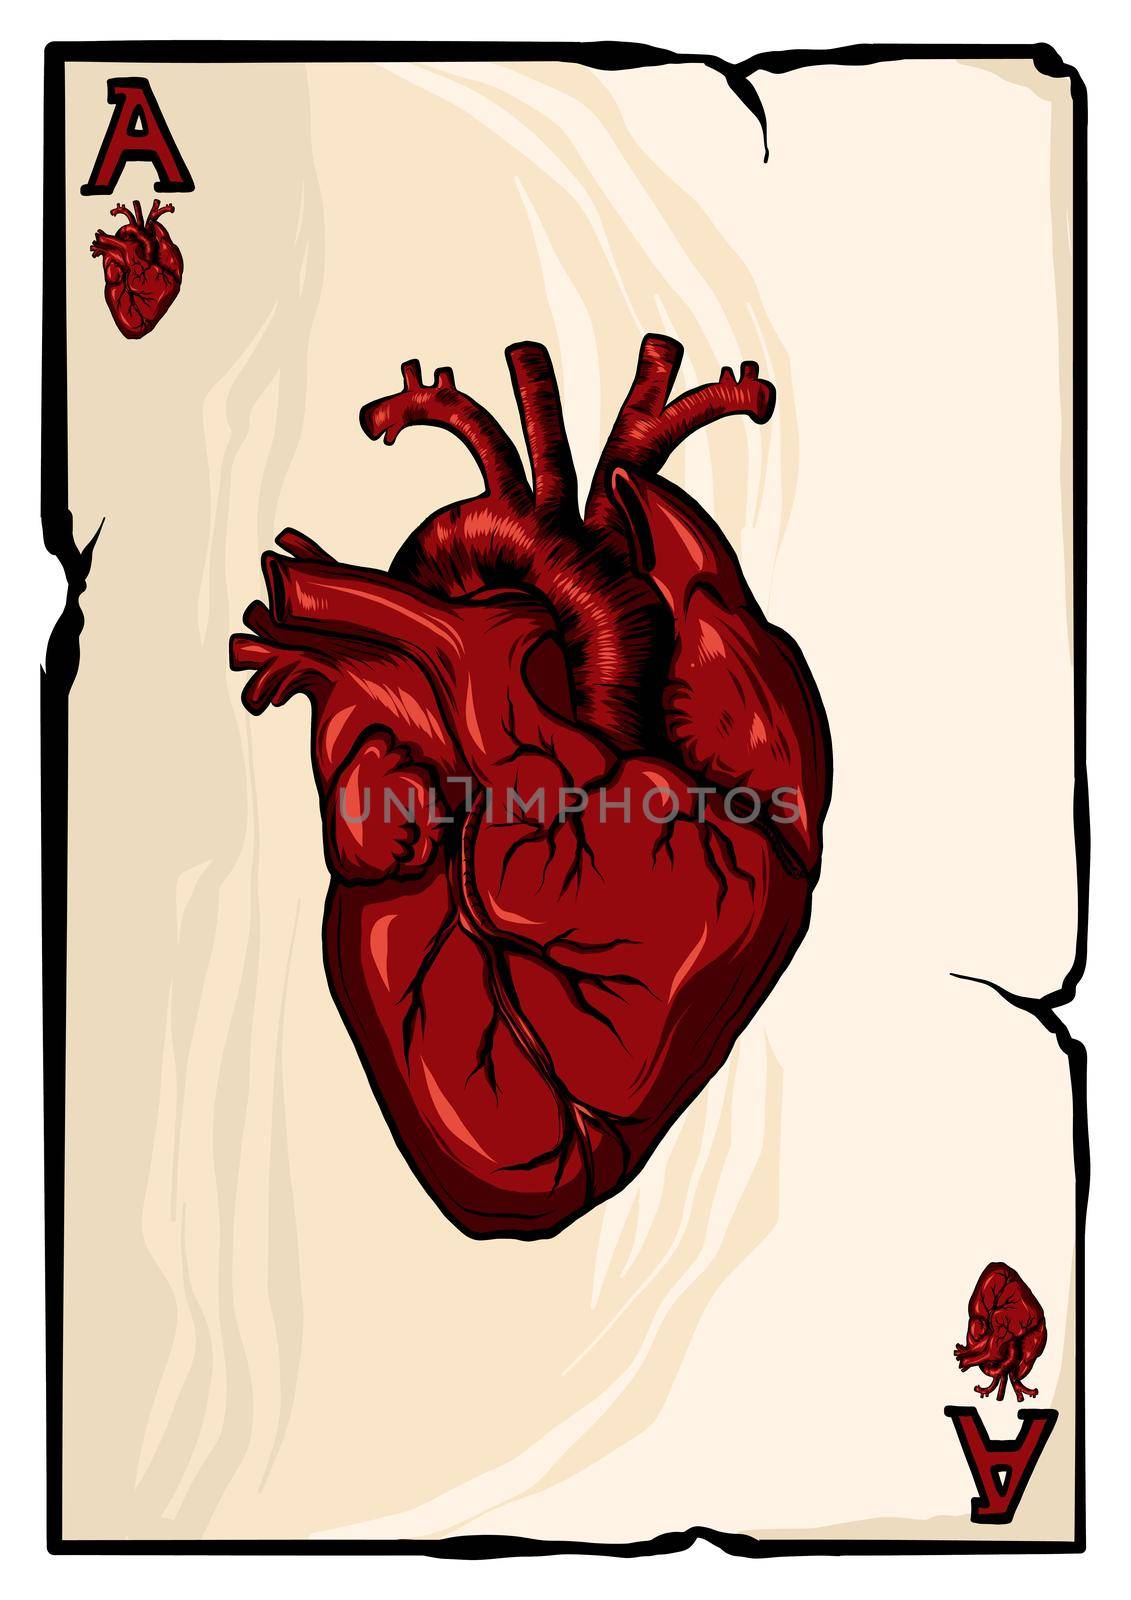 Ace of hearts on white background